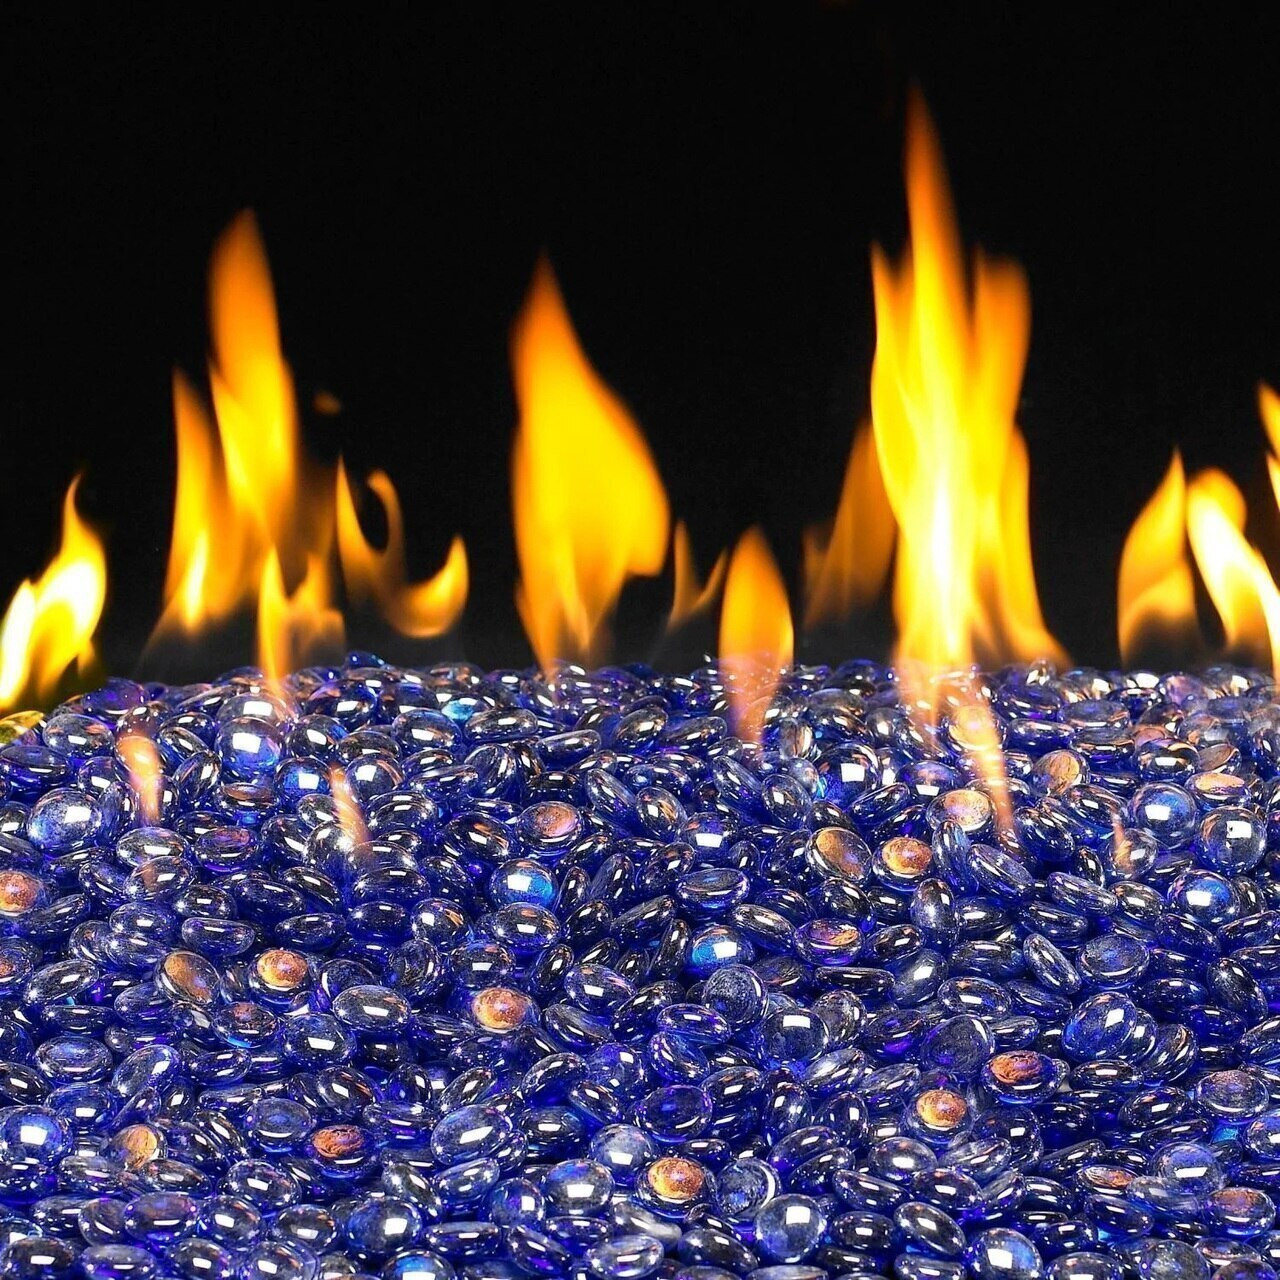 10 lbs. Deep Sea Blue Fire Glass Beads for Indoor and Outdoor Fire Pits or Fireplaces